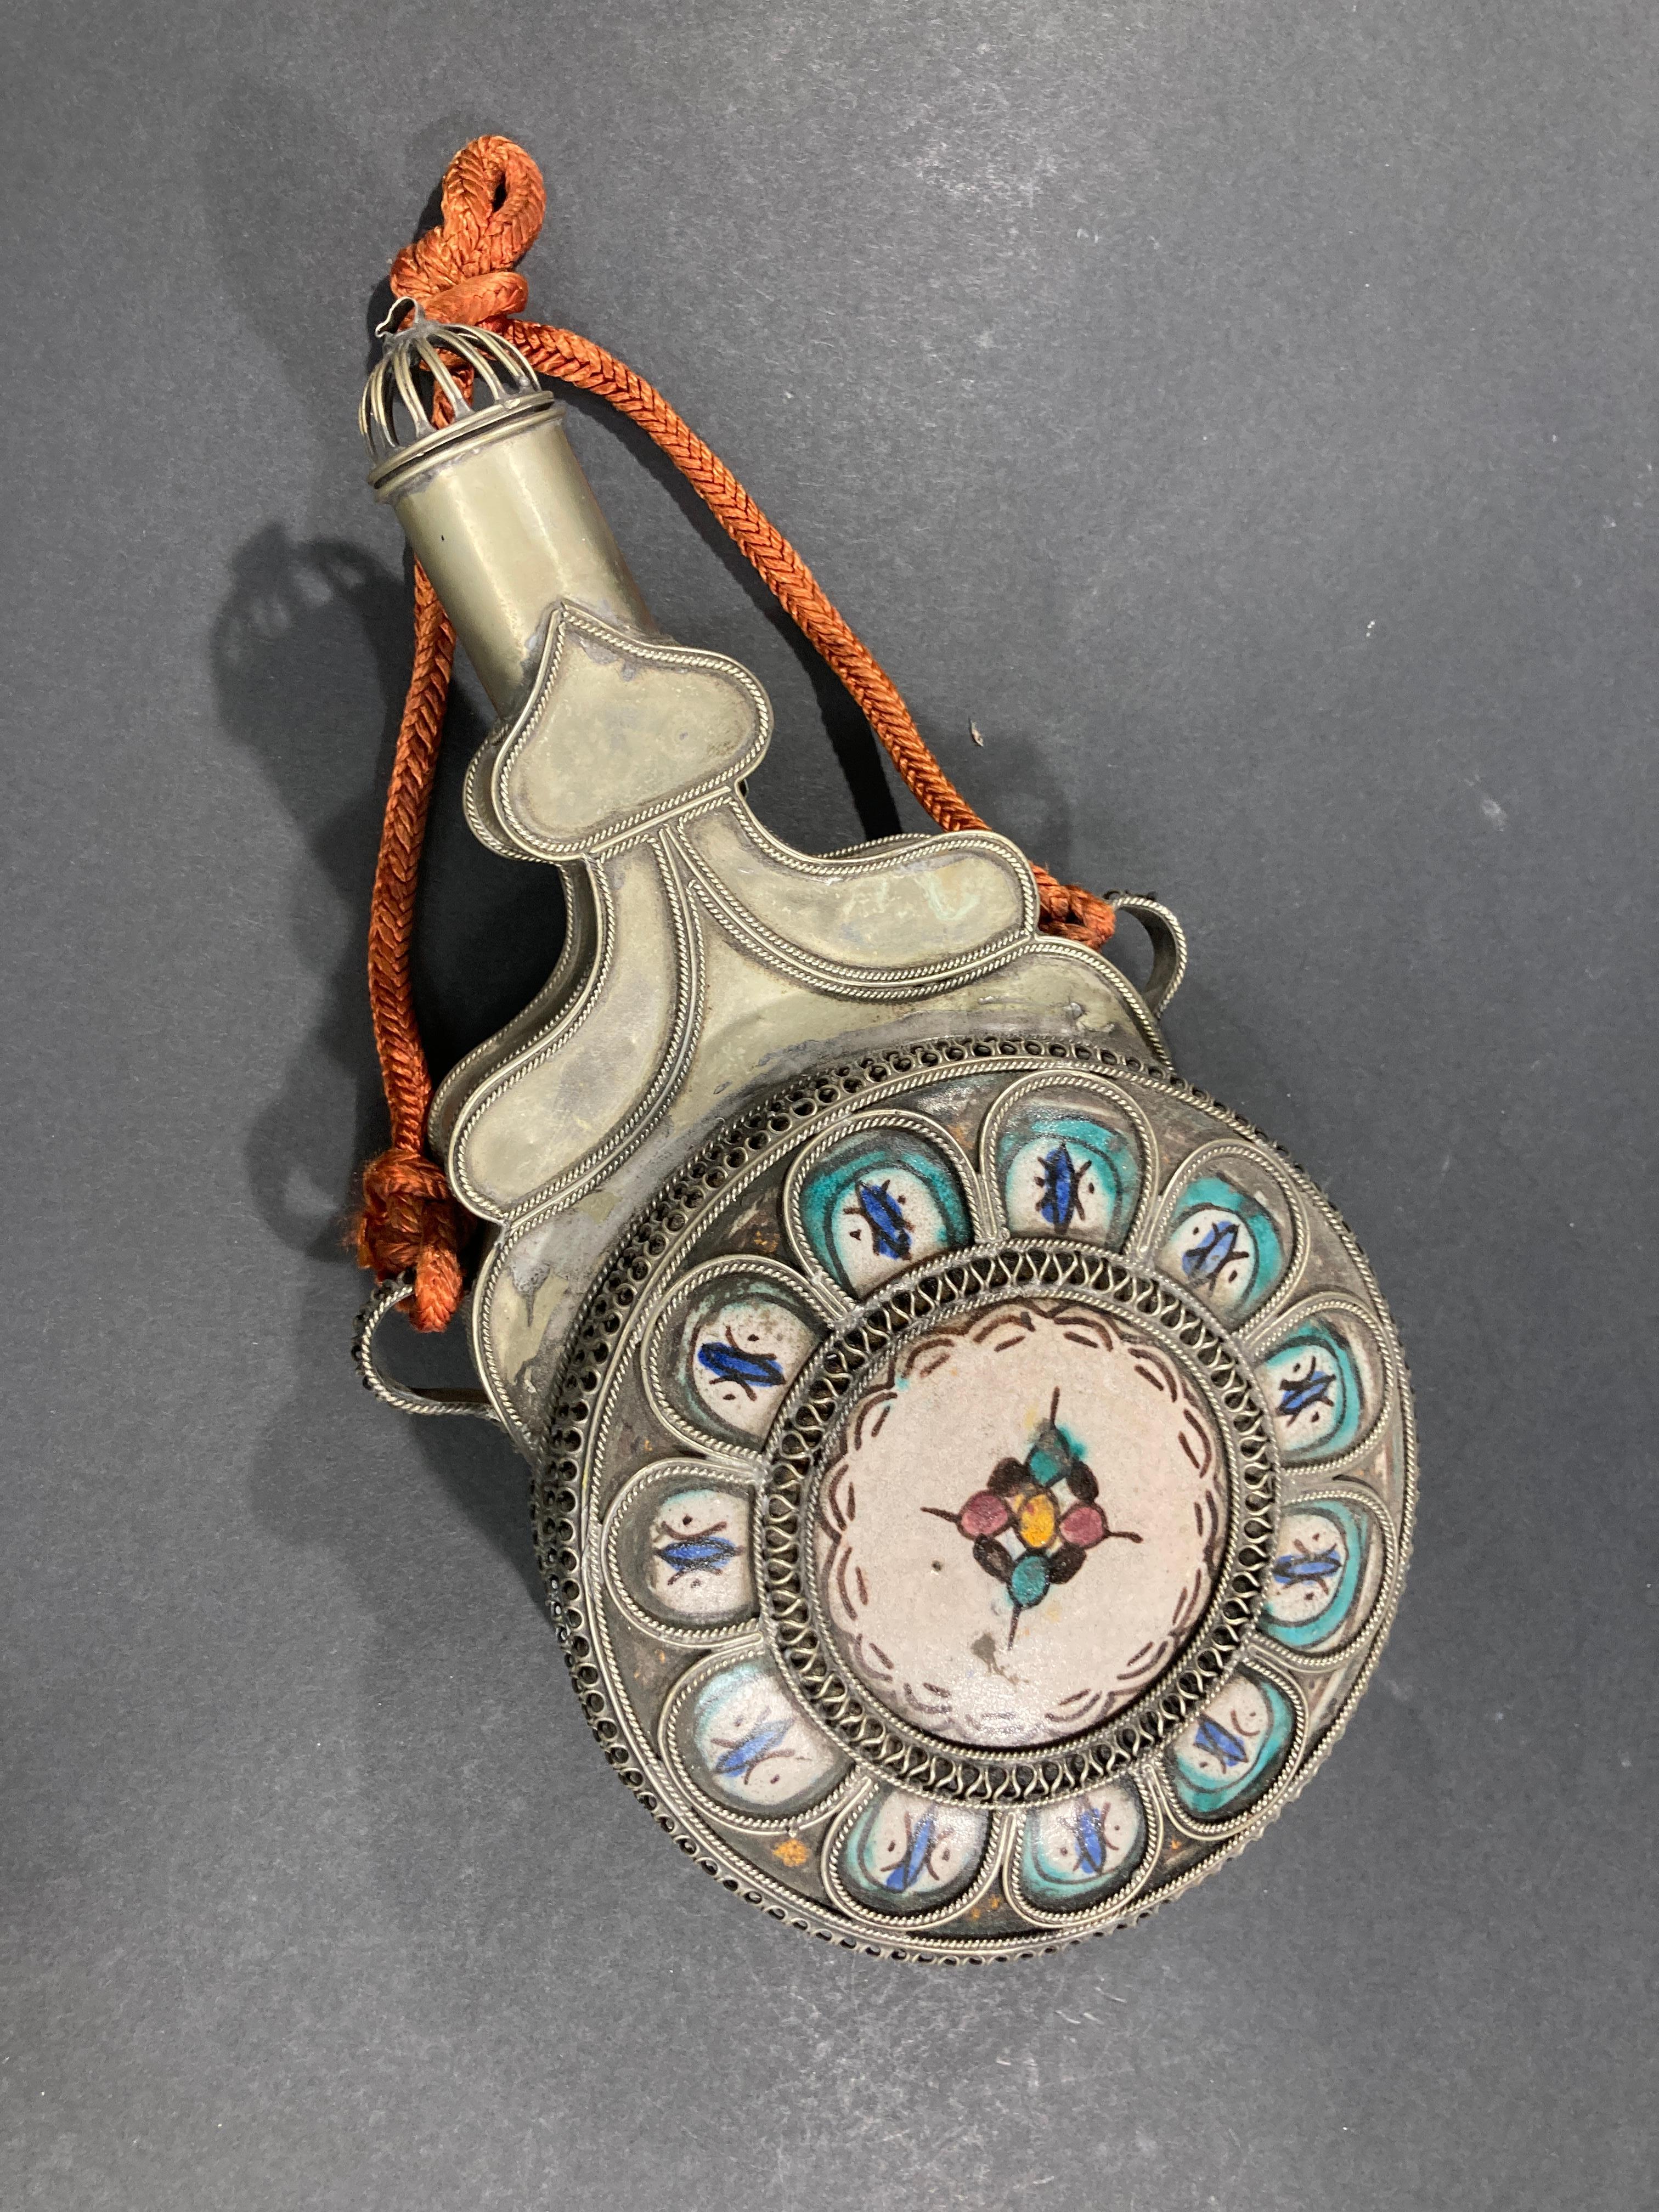 Early 20th century antique Moroccan ceramic from Fez, adorned with silver nickel filigree handwork.
Great one of a kind handcrafted urn with lid with hand-painted designs.
Great Moorish accent.
Moroccan earthenware from Fez with the